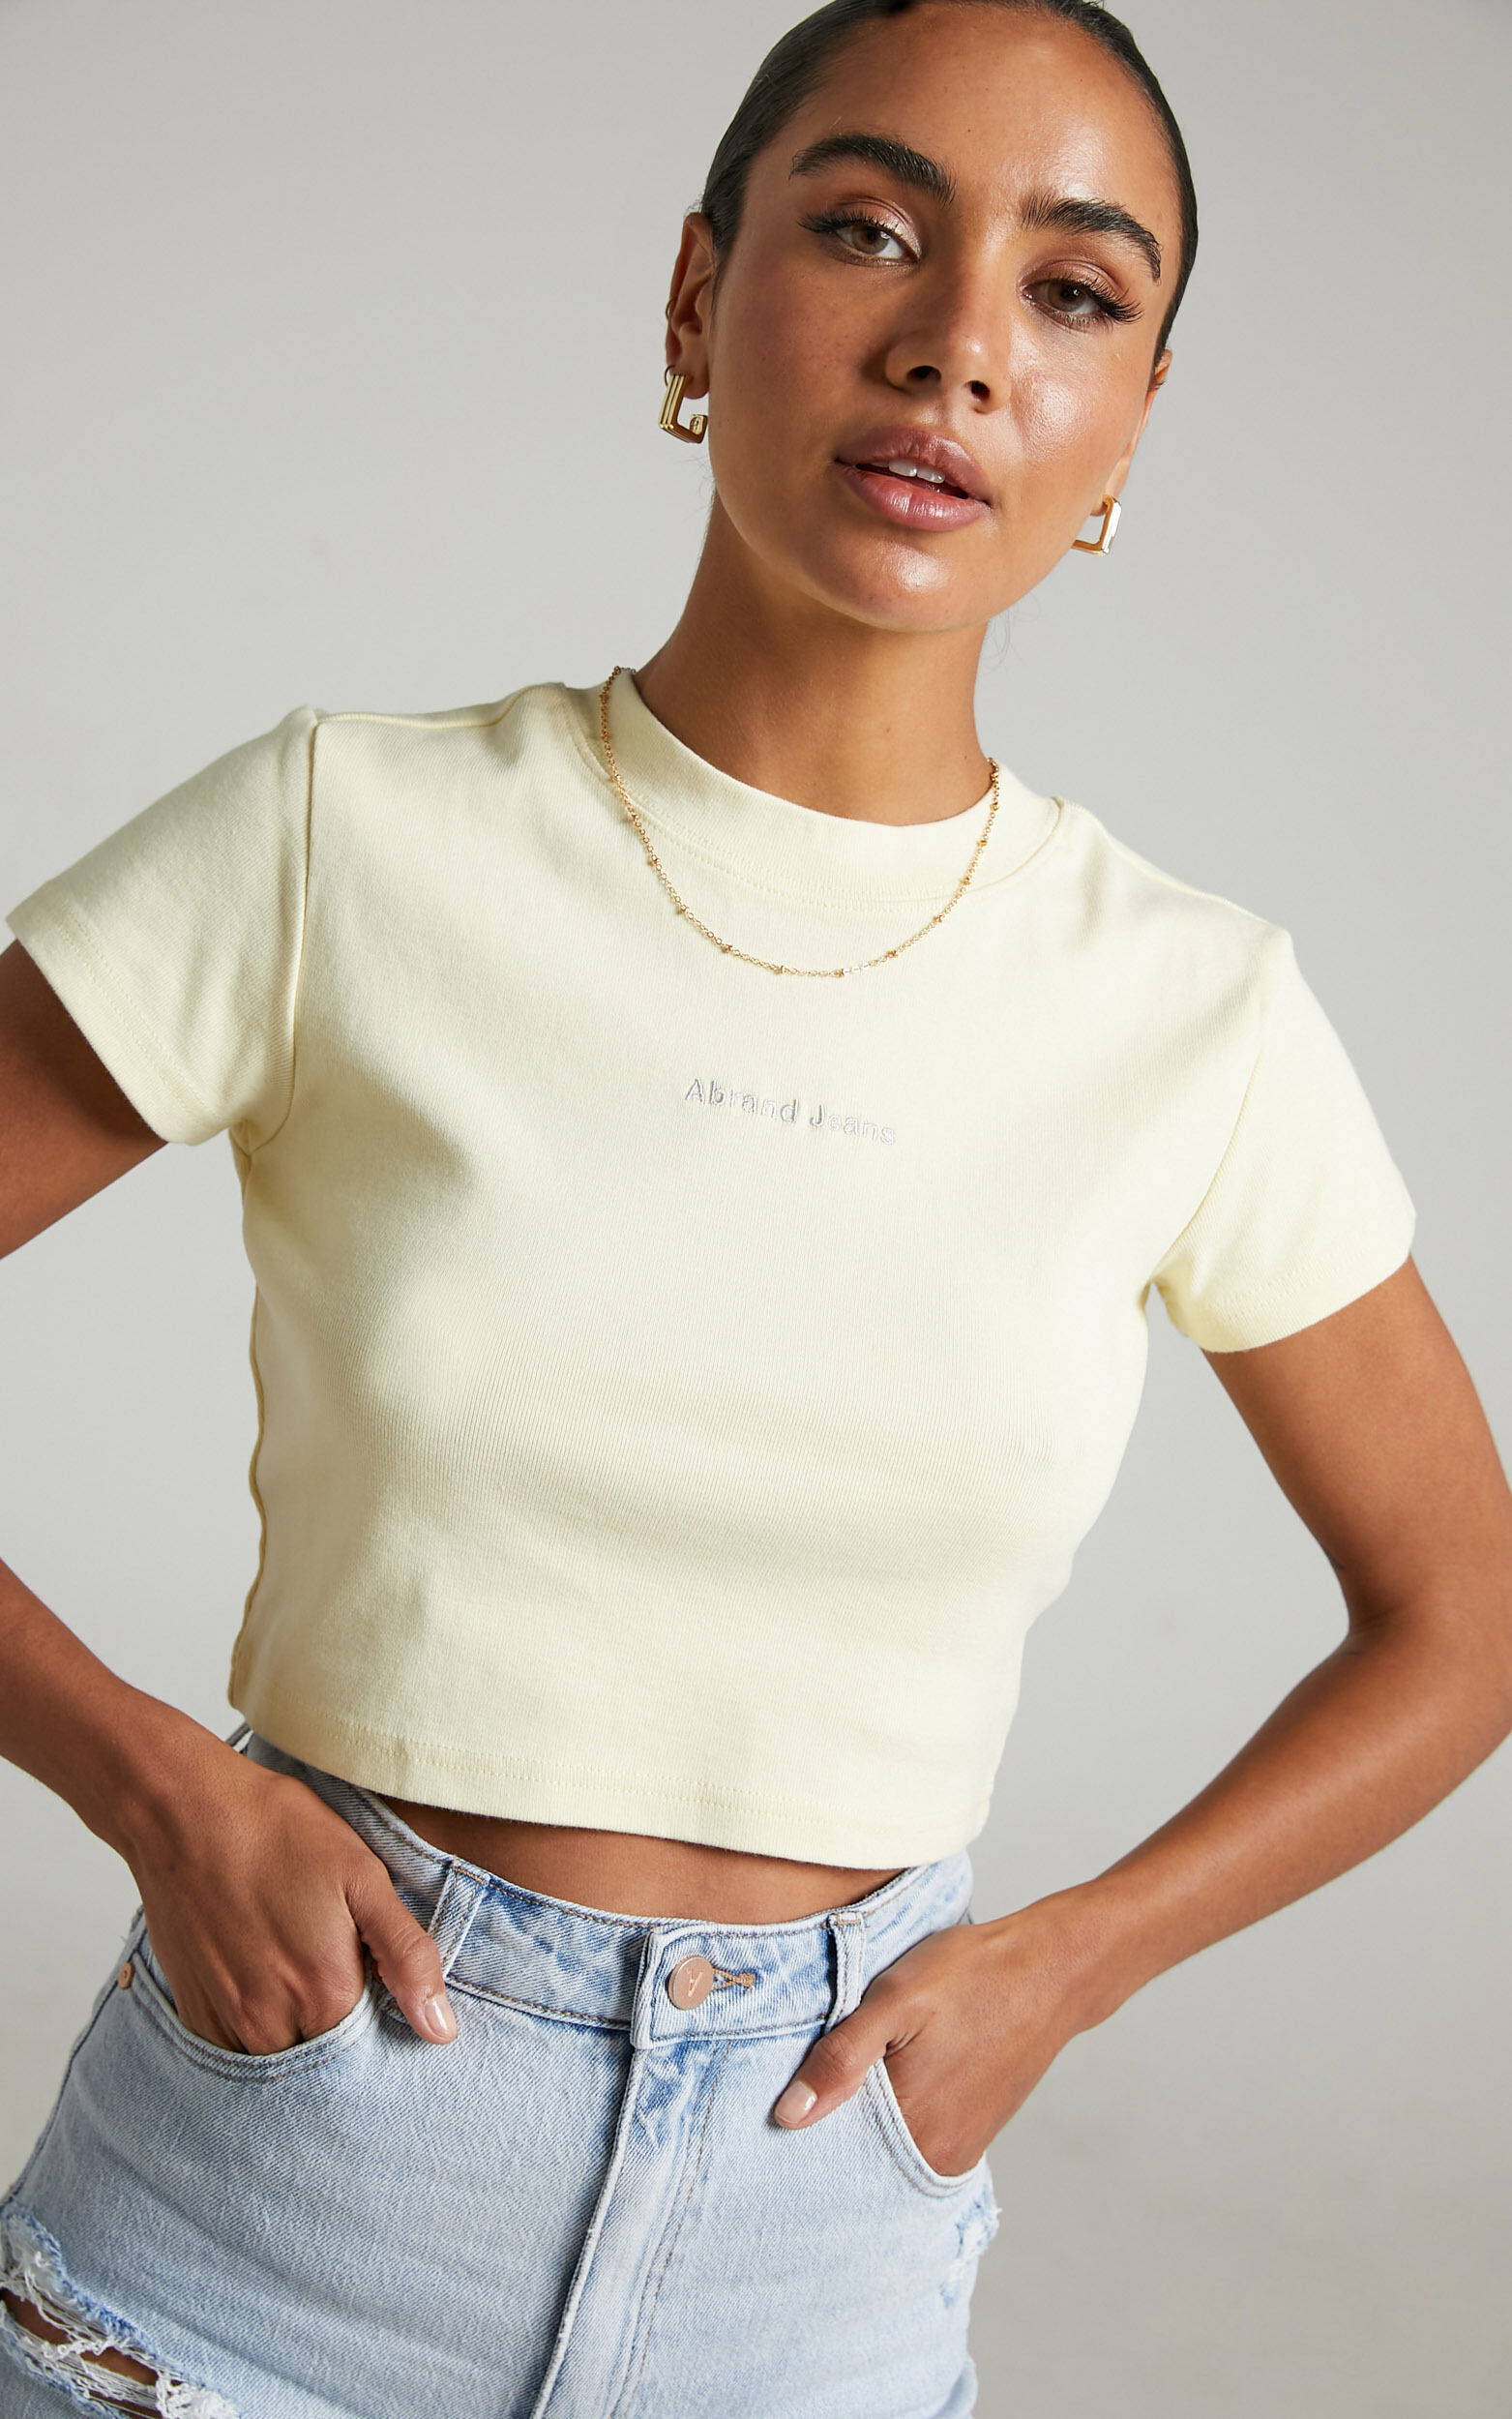 Abrand - 90's Crop Tee in Butter - L, YEL1, super-hi-res image number null